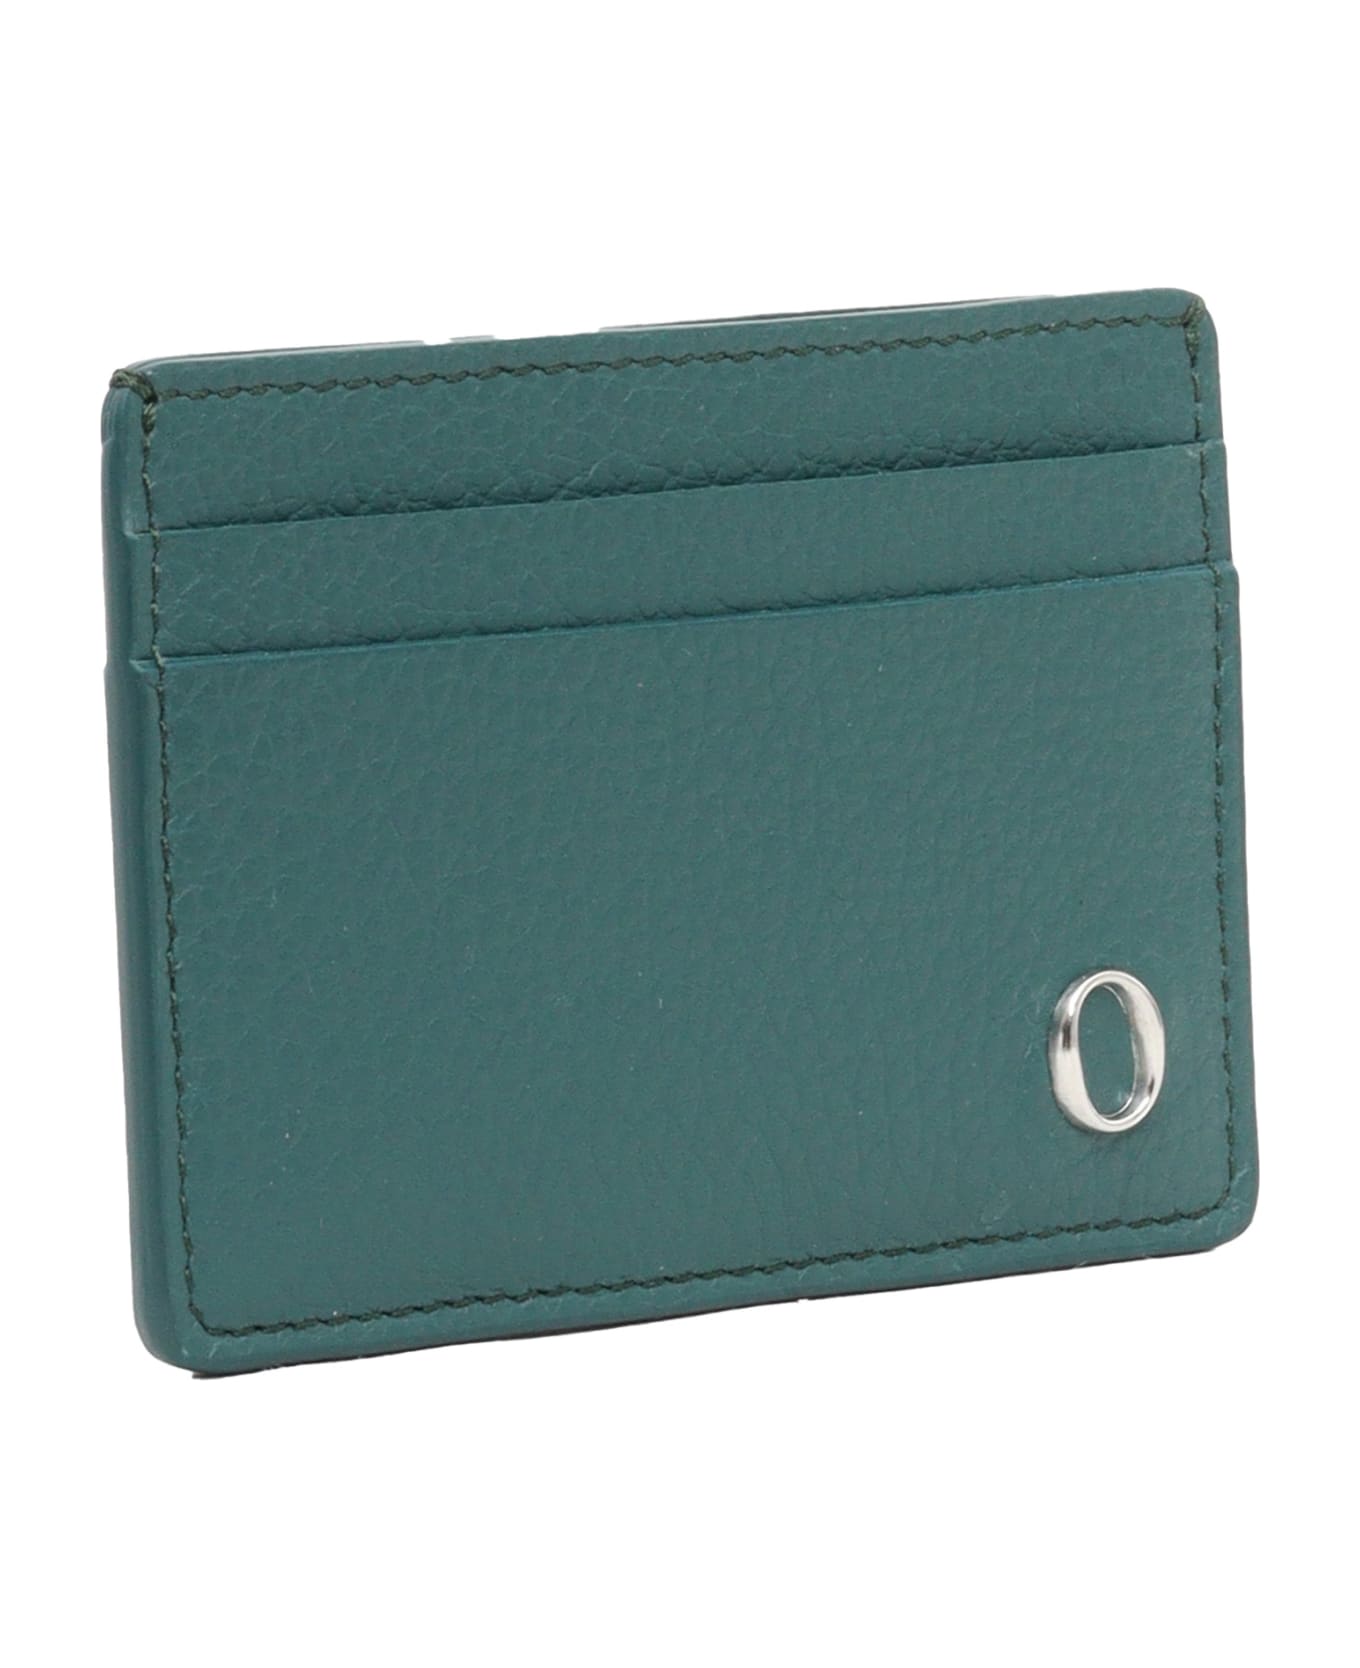 Orciani Green Wallet - BROWN